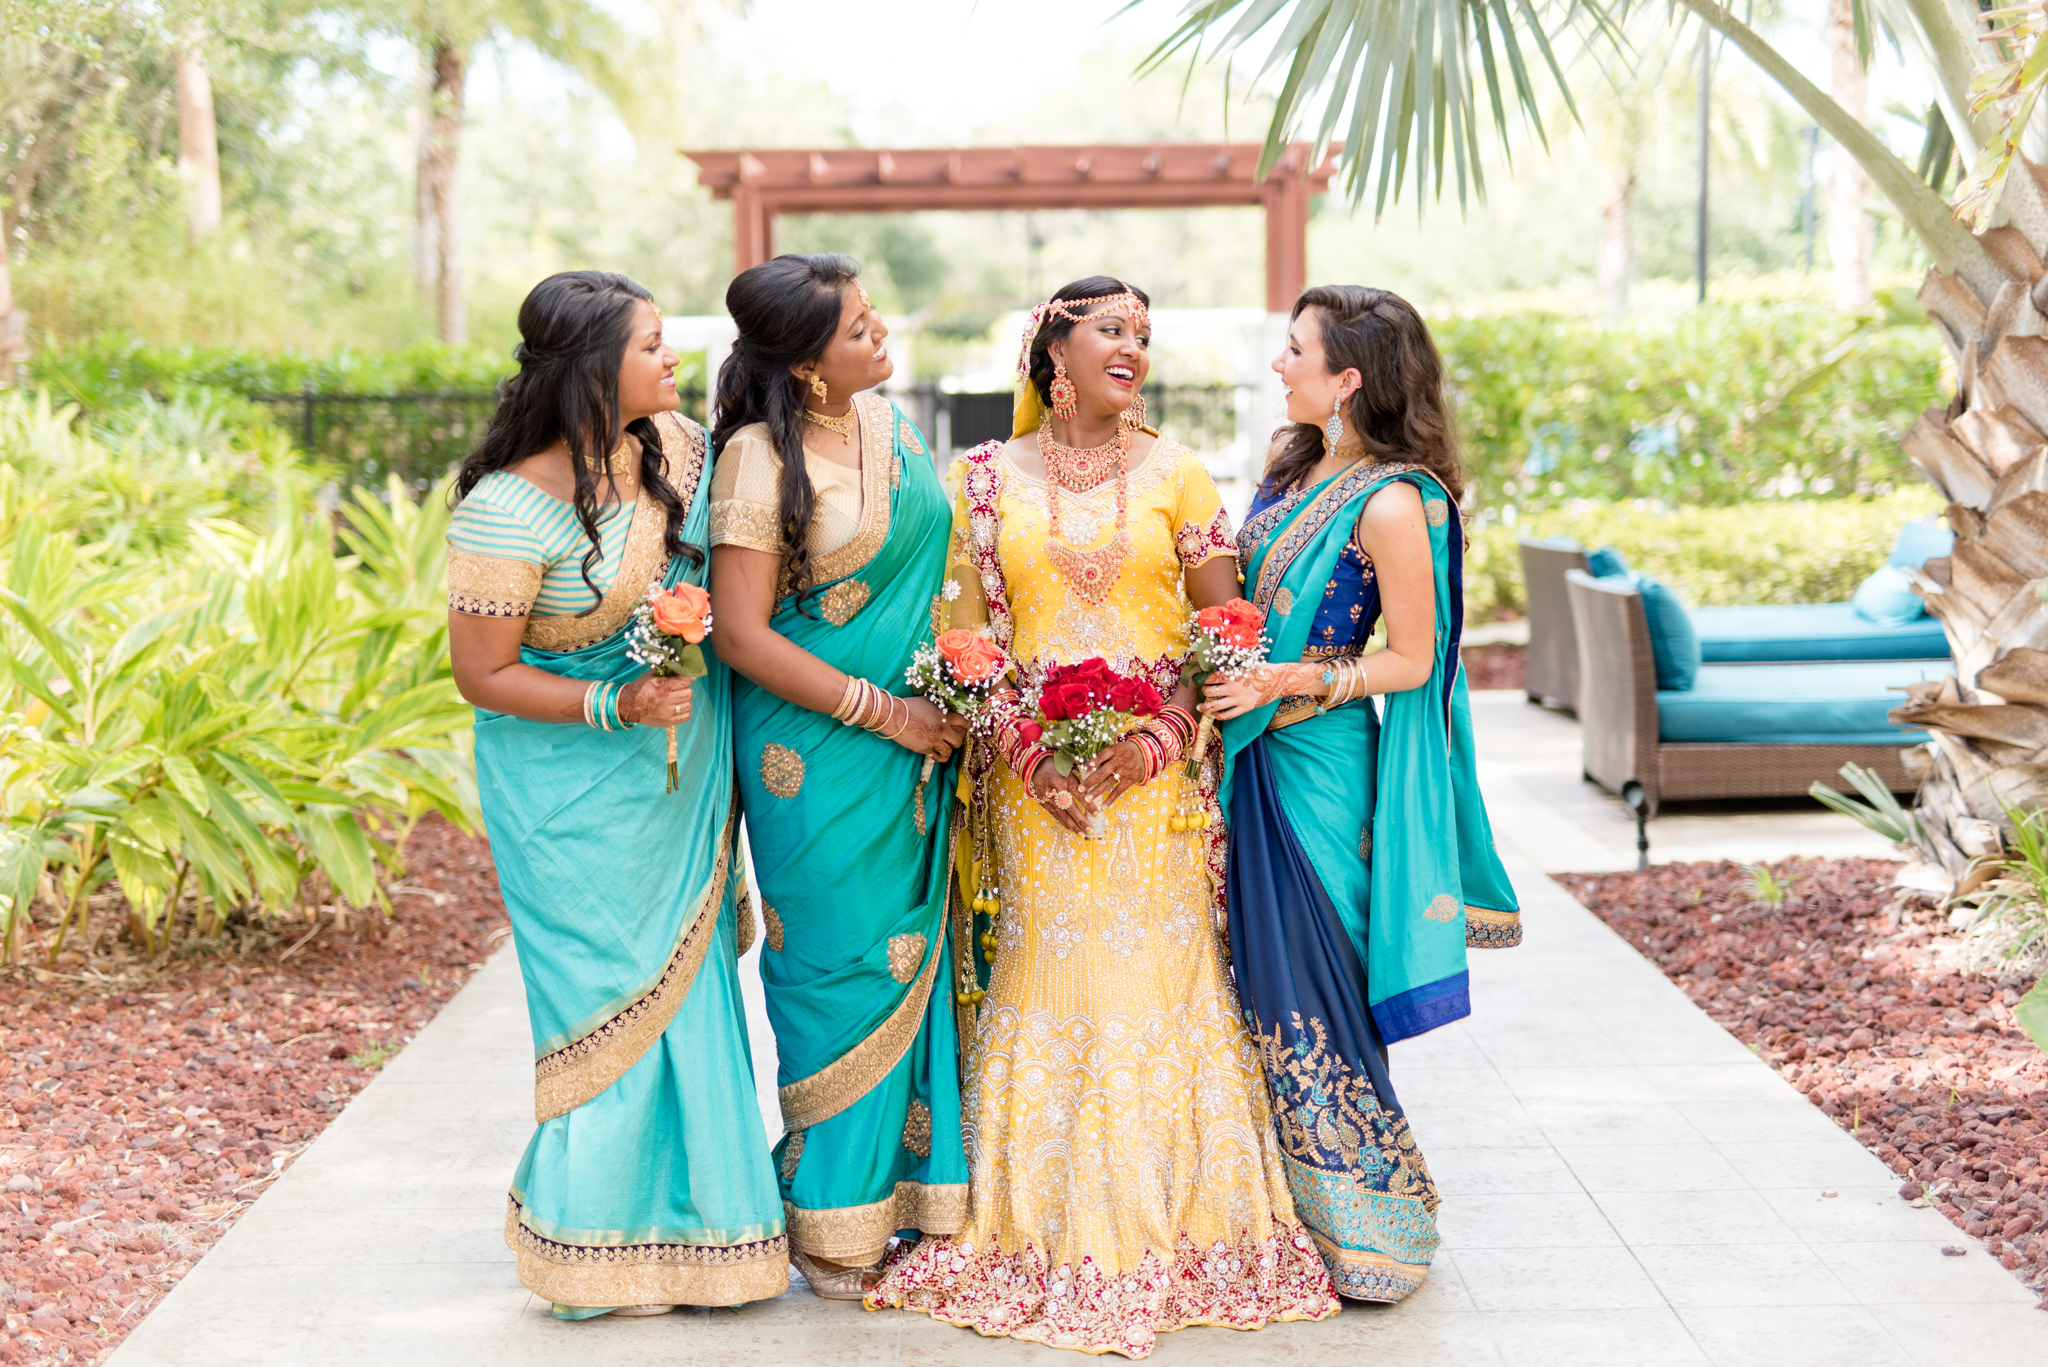 Bride laughs with her bridesmaids.